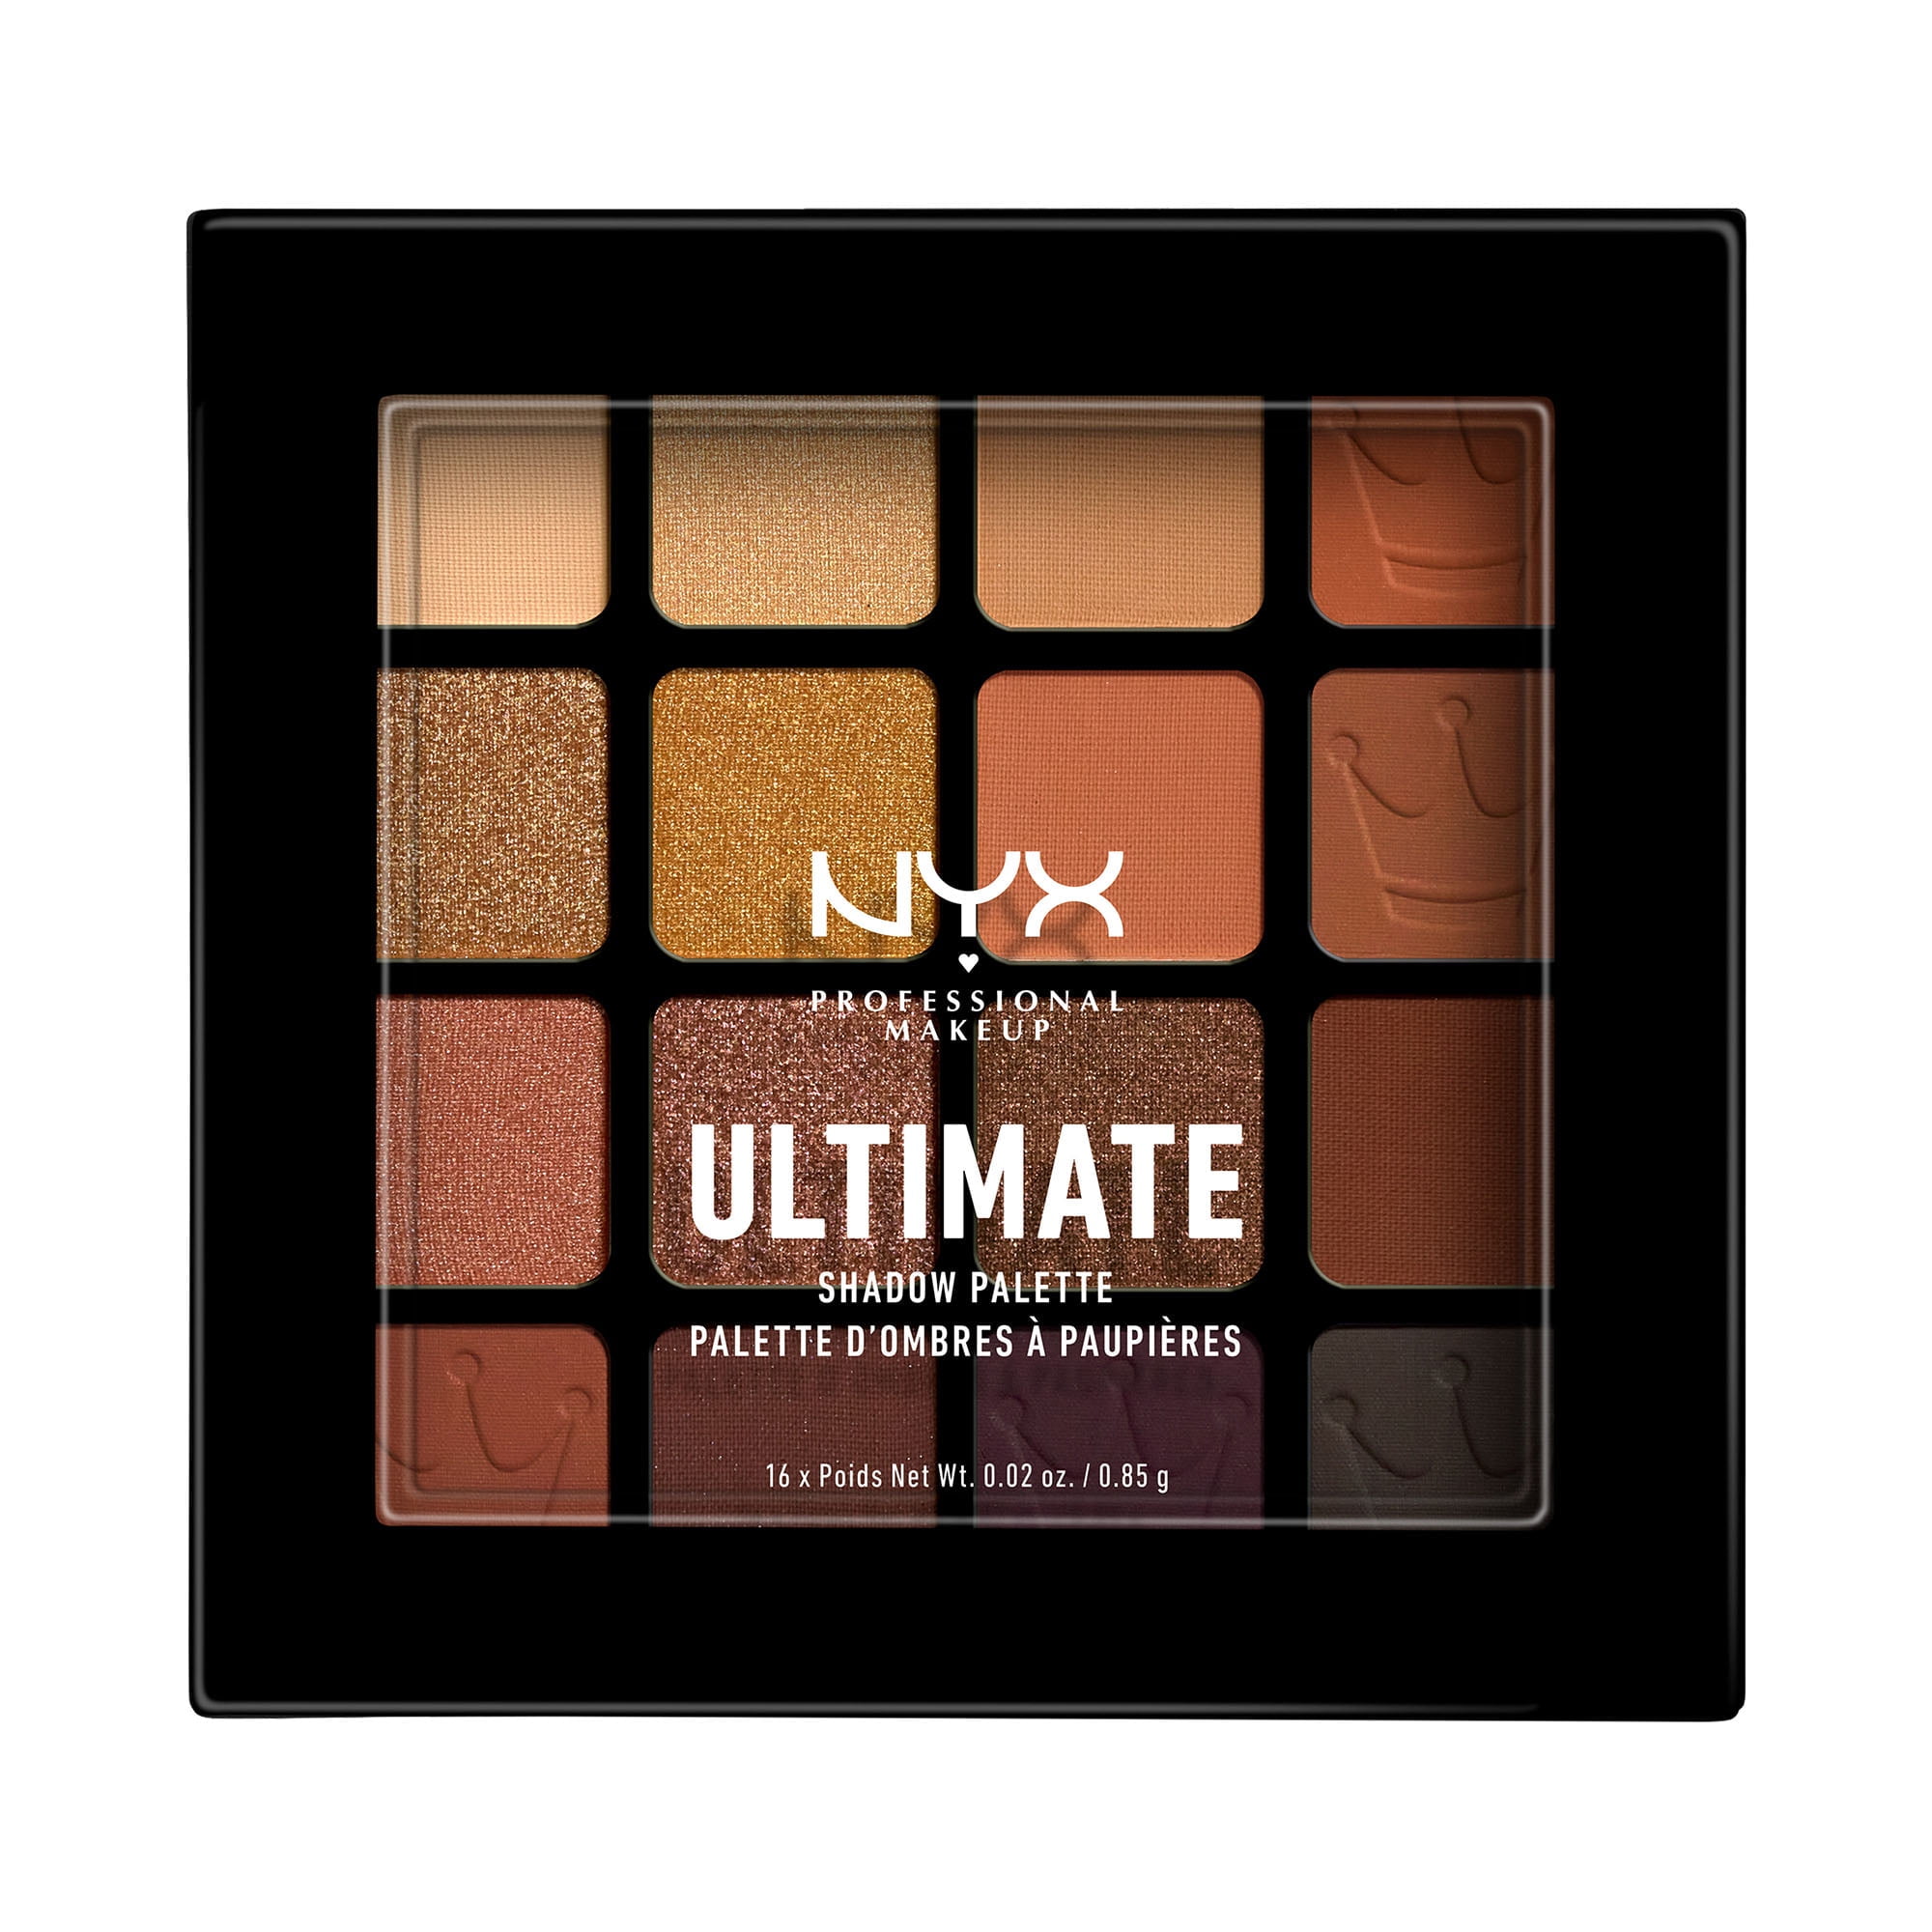 NYX Professional Makeup Ultimate Eye Shadow Palette, Brights, 0.32 oz 